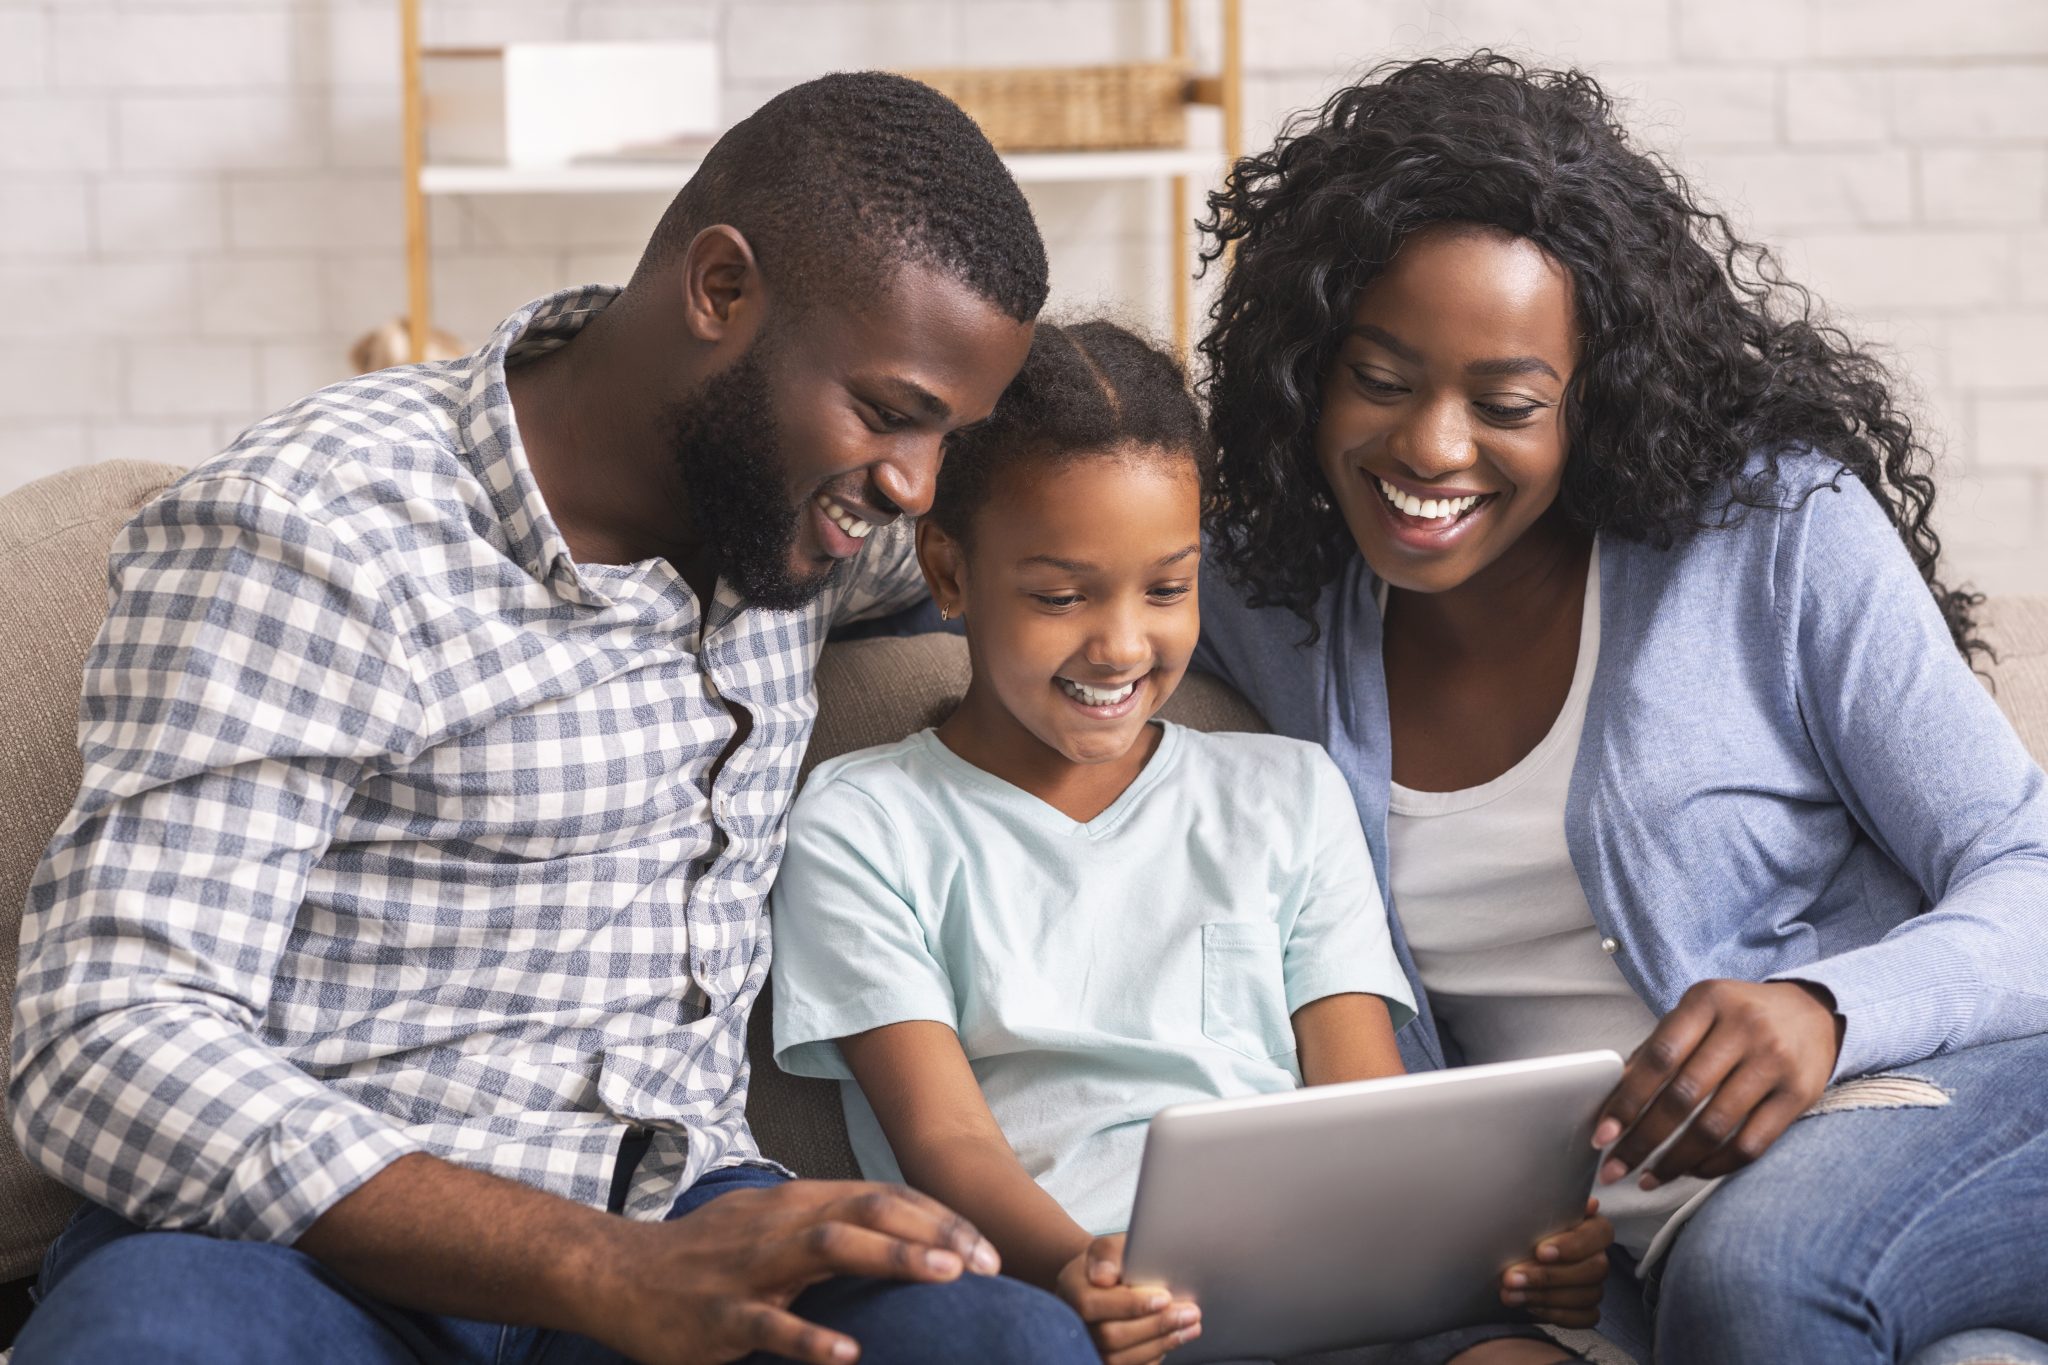 Cheerful black family using digital tablet together at home.